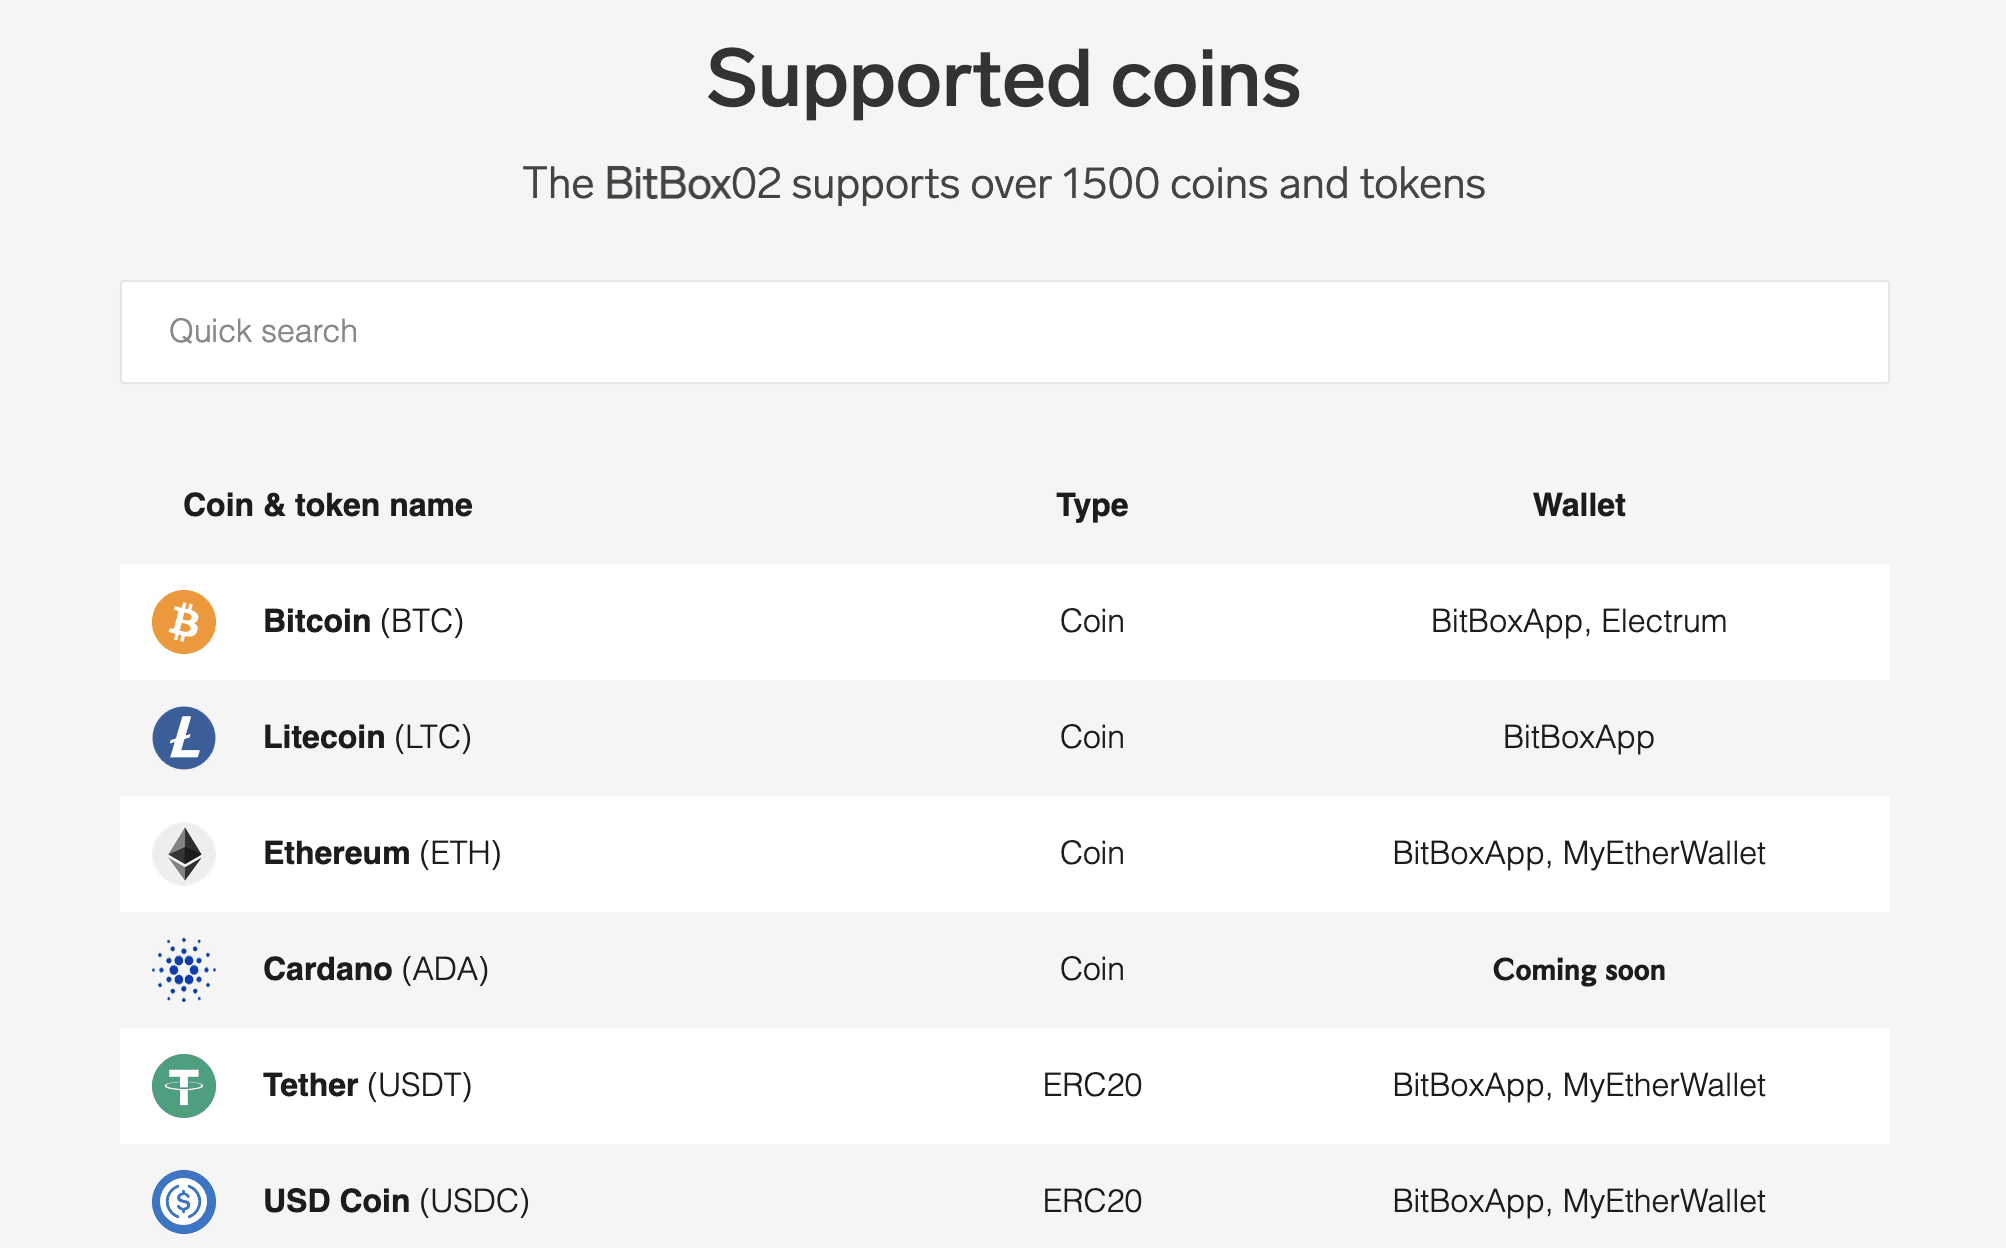 BitBox supported coins